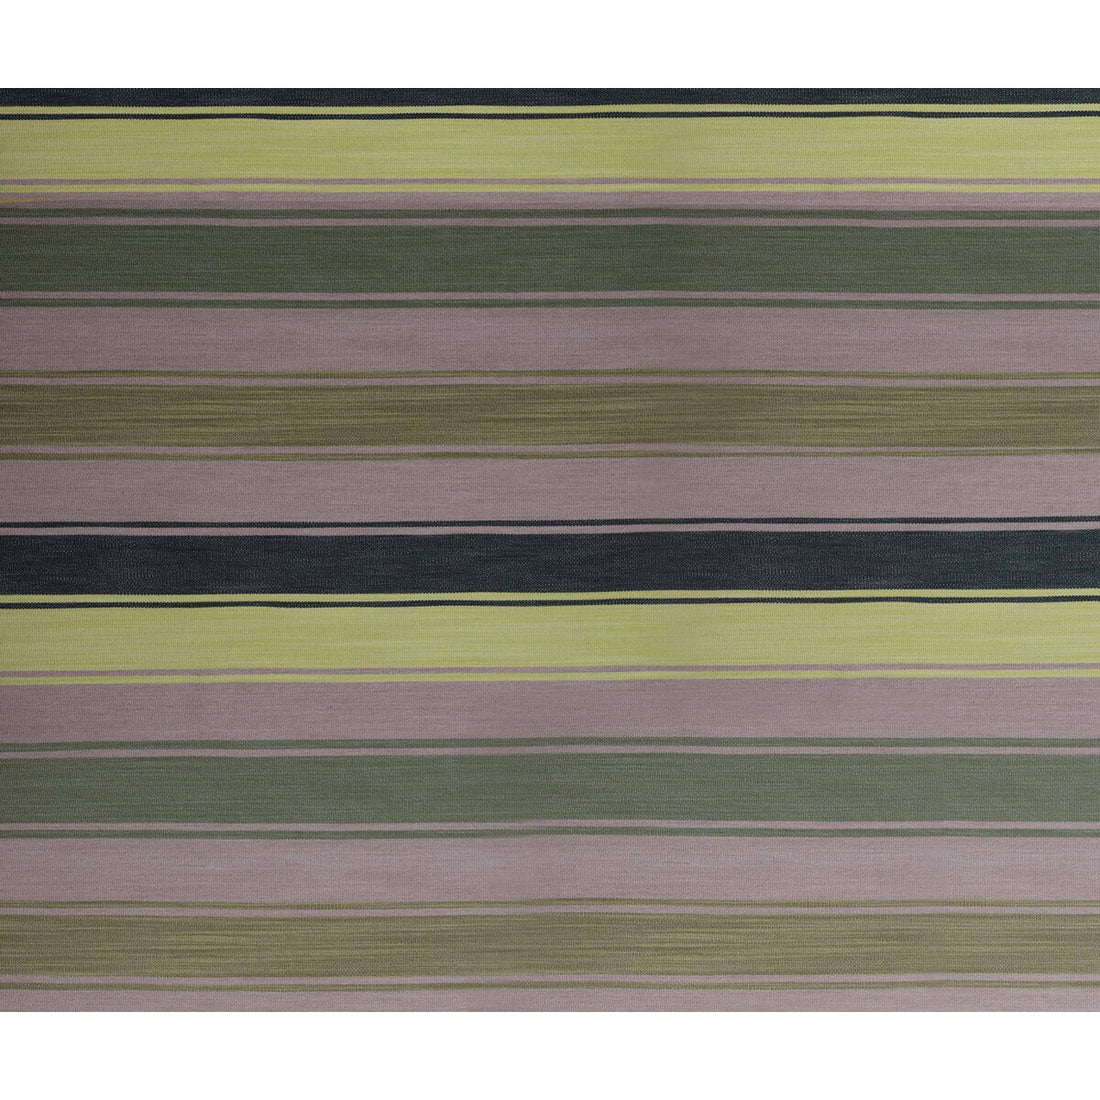 Masai fabric in verde color - pattern GDT5391.1.0 - by Gaston y Daniela in the Gaston Africalia collection